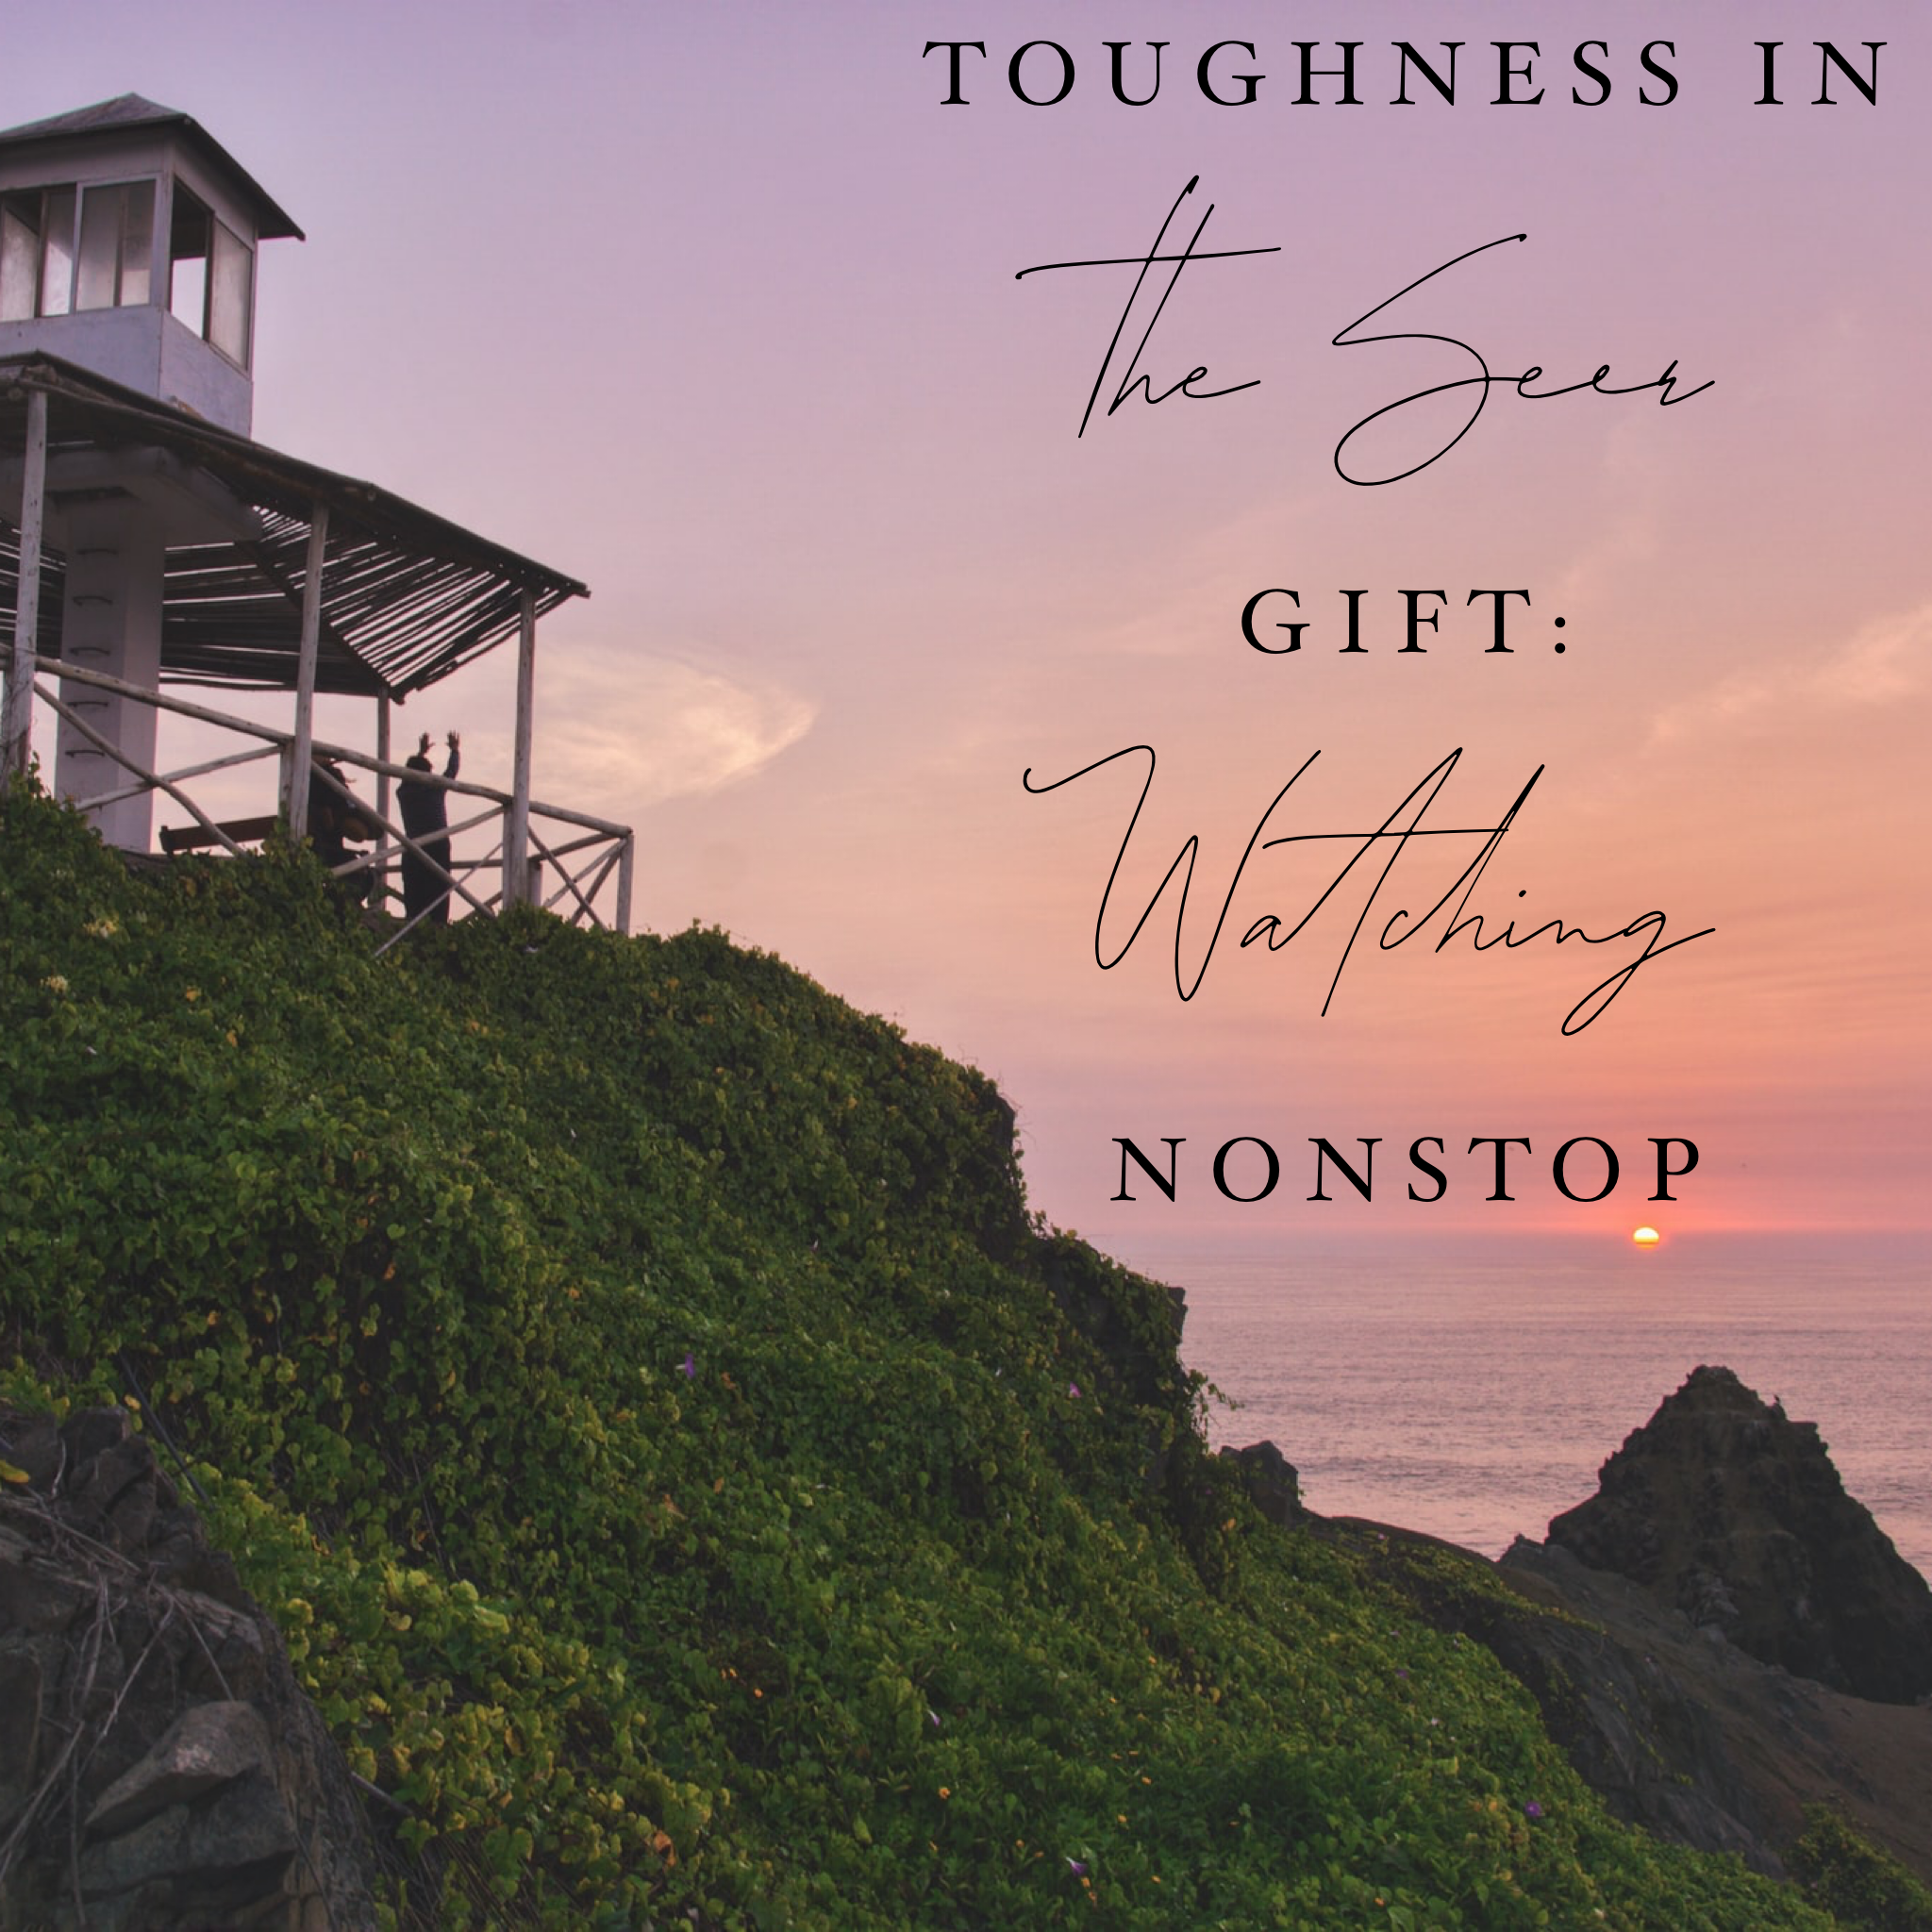 Toughness in the Seer Gift: Watching Nonstop - 10/1/19